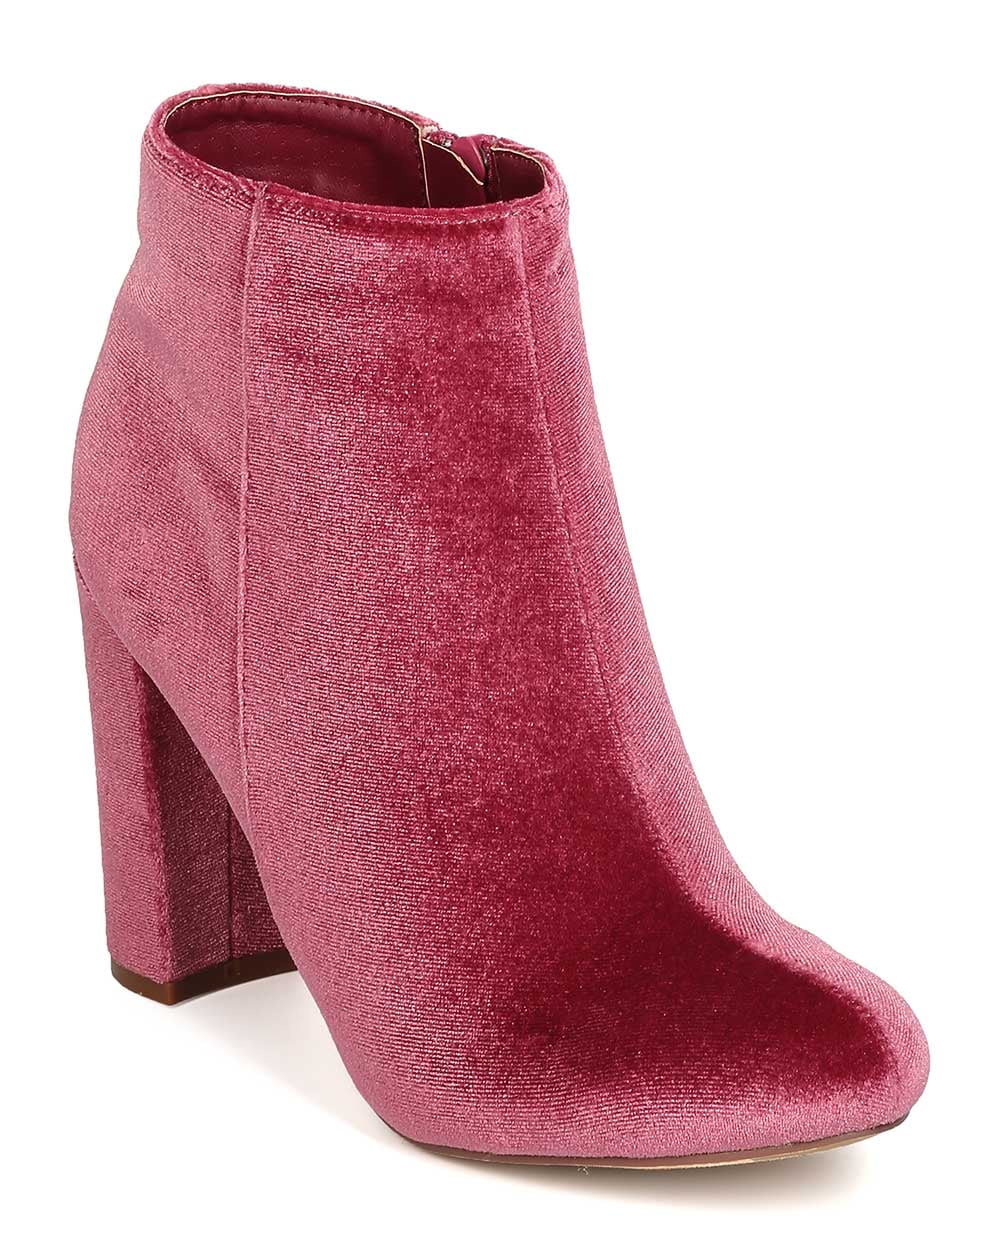 Liliana Kenzy-4 Velvet Round Toe Chunky High Heel Dress Ankle Boots Bootie 